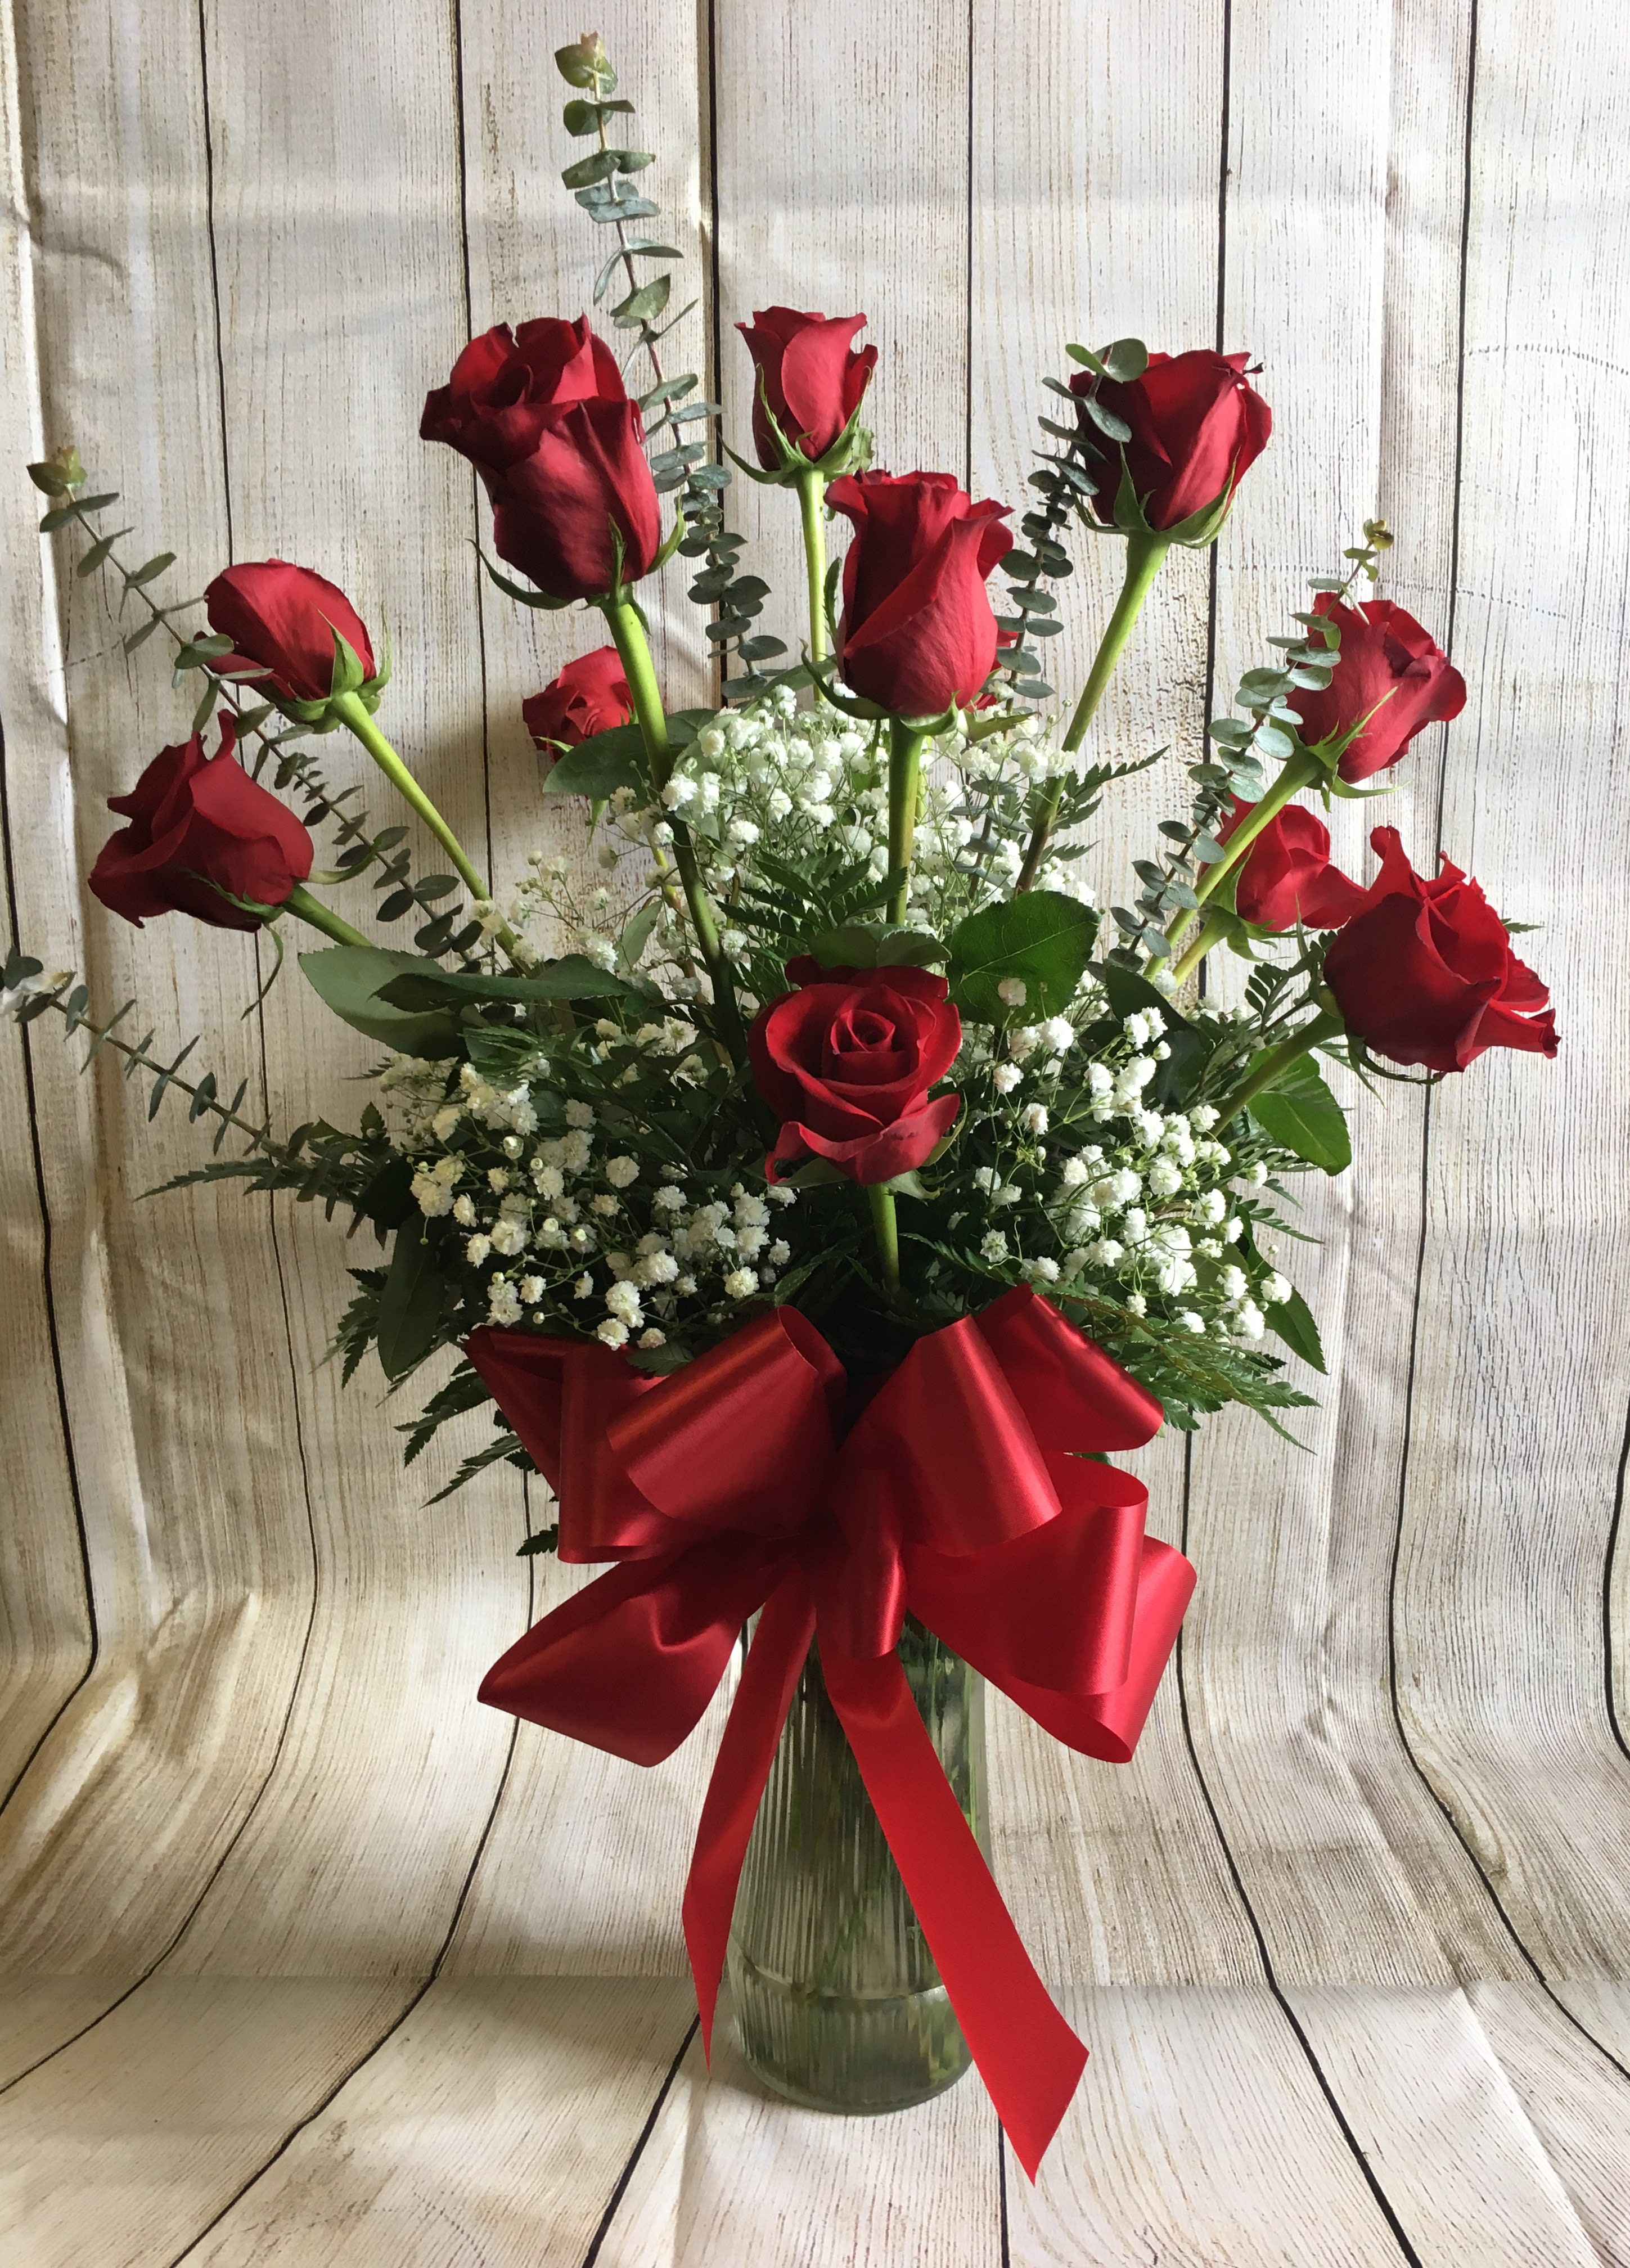 Dozen Roses (Specify color in special instructions) - A dozen red roses are always perfect, always savored. A traditional, beautiful way to express your love. Color of bow and filler will vary. Available in red, pink, white, yellow, lavender, orange and mixed with special request. Most colors available within a 24 hour notice.